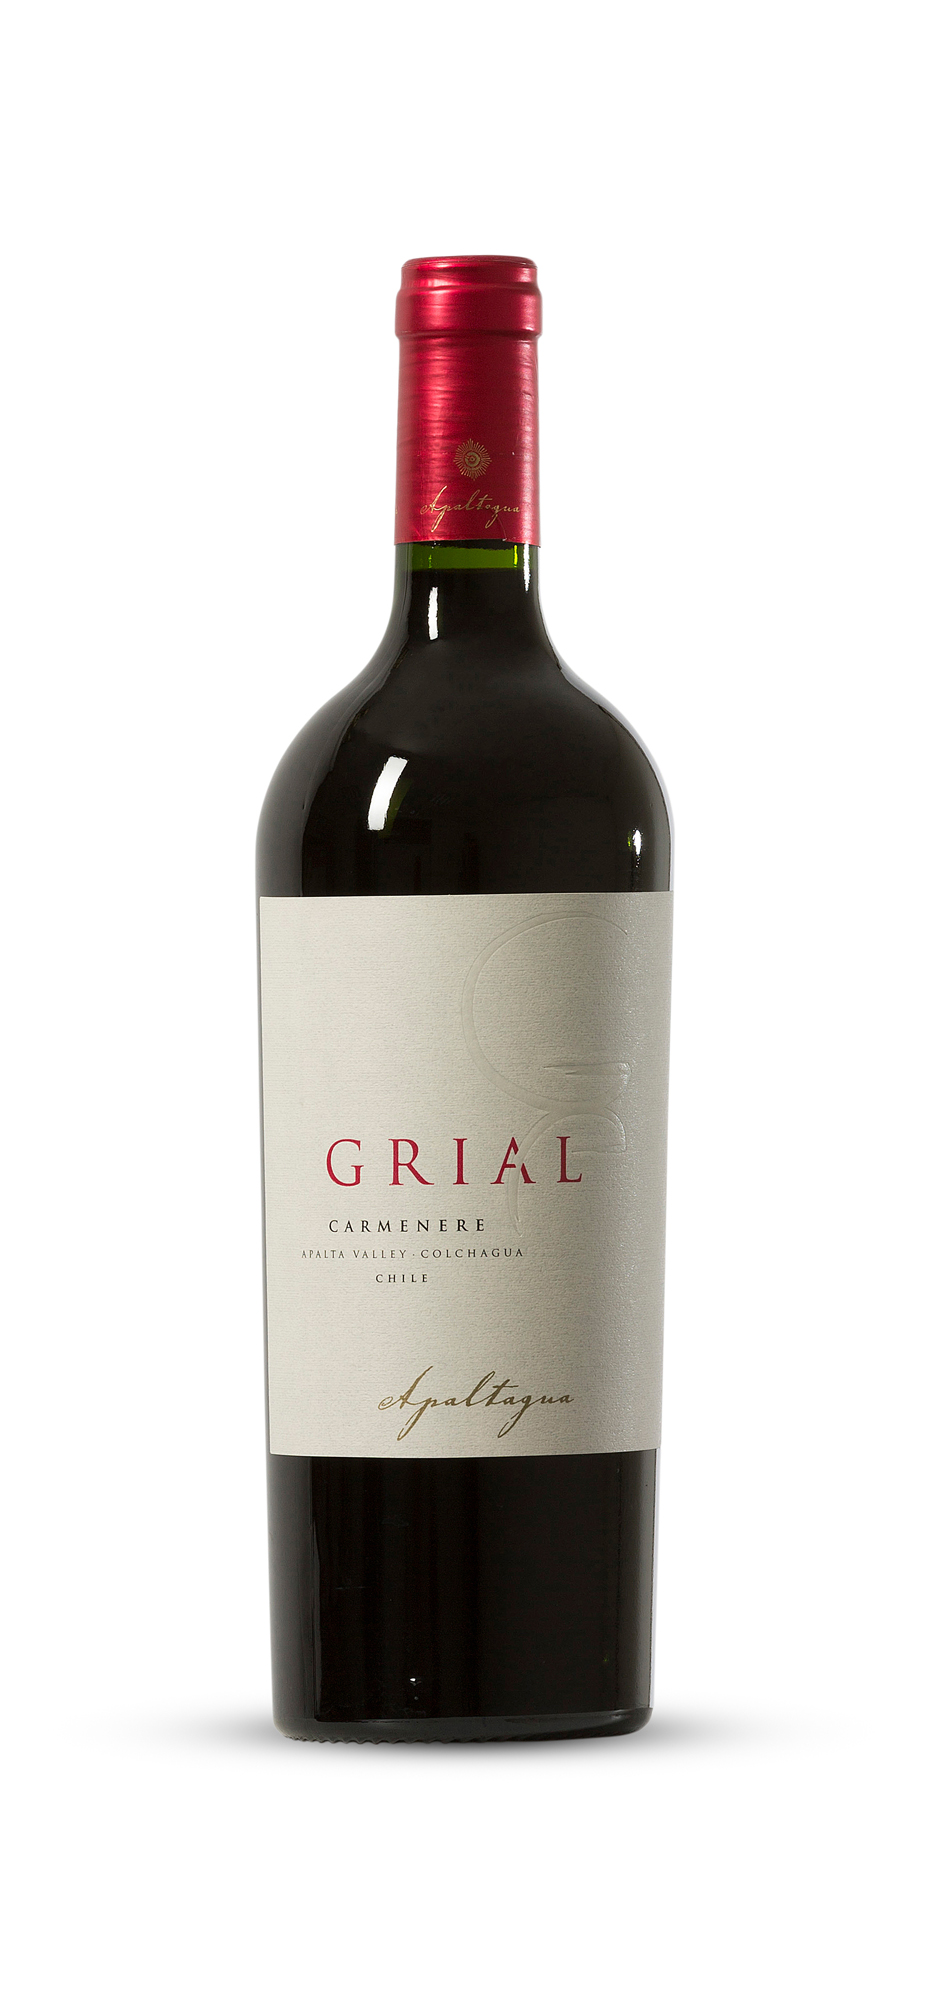 2008 Apaltagua Grial Carmenere, Colchagua Valley